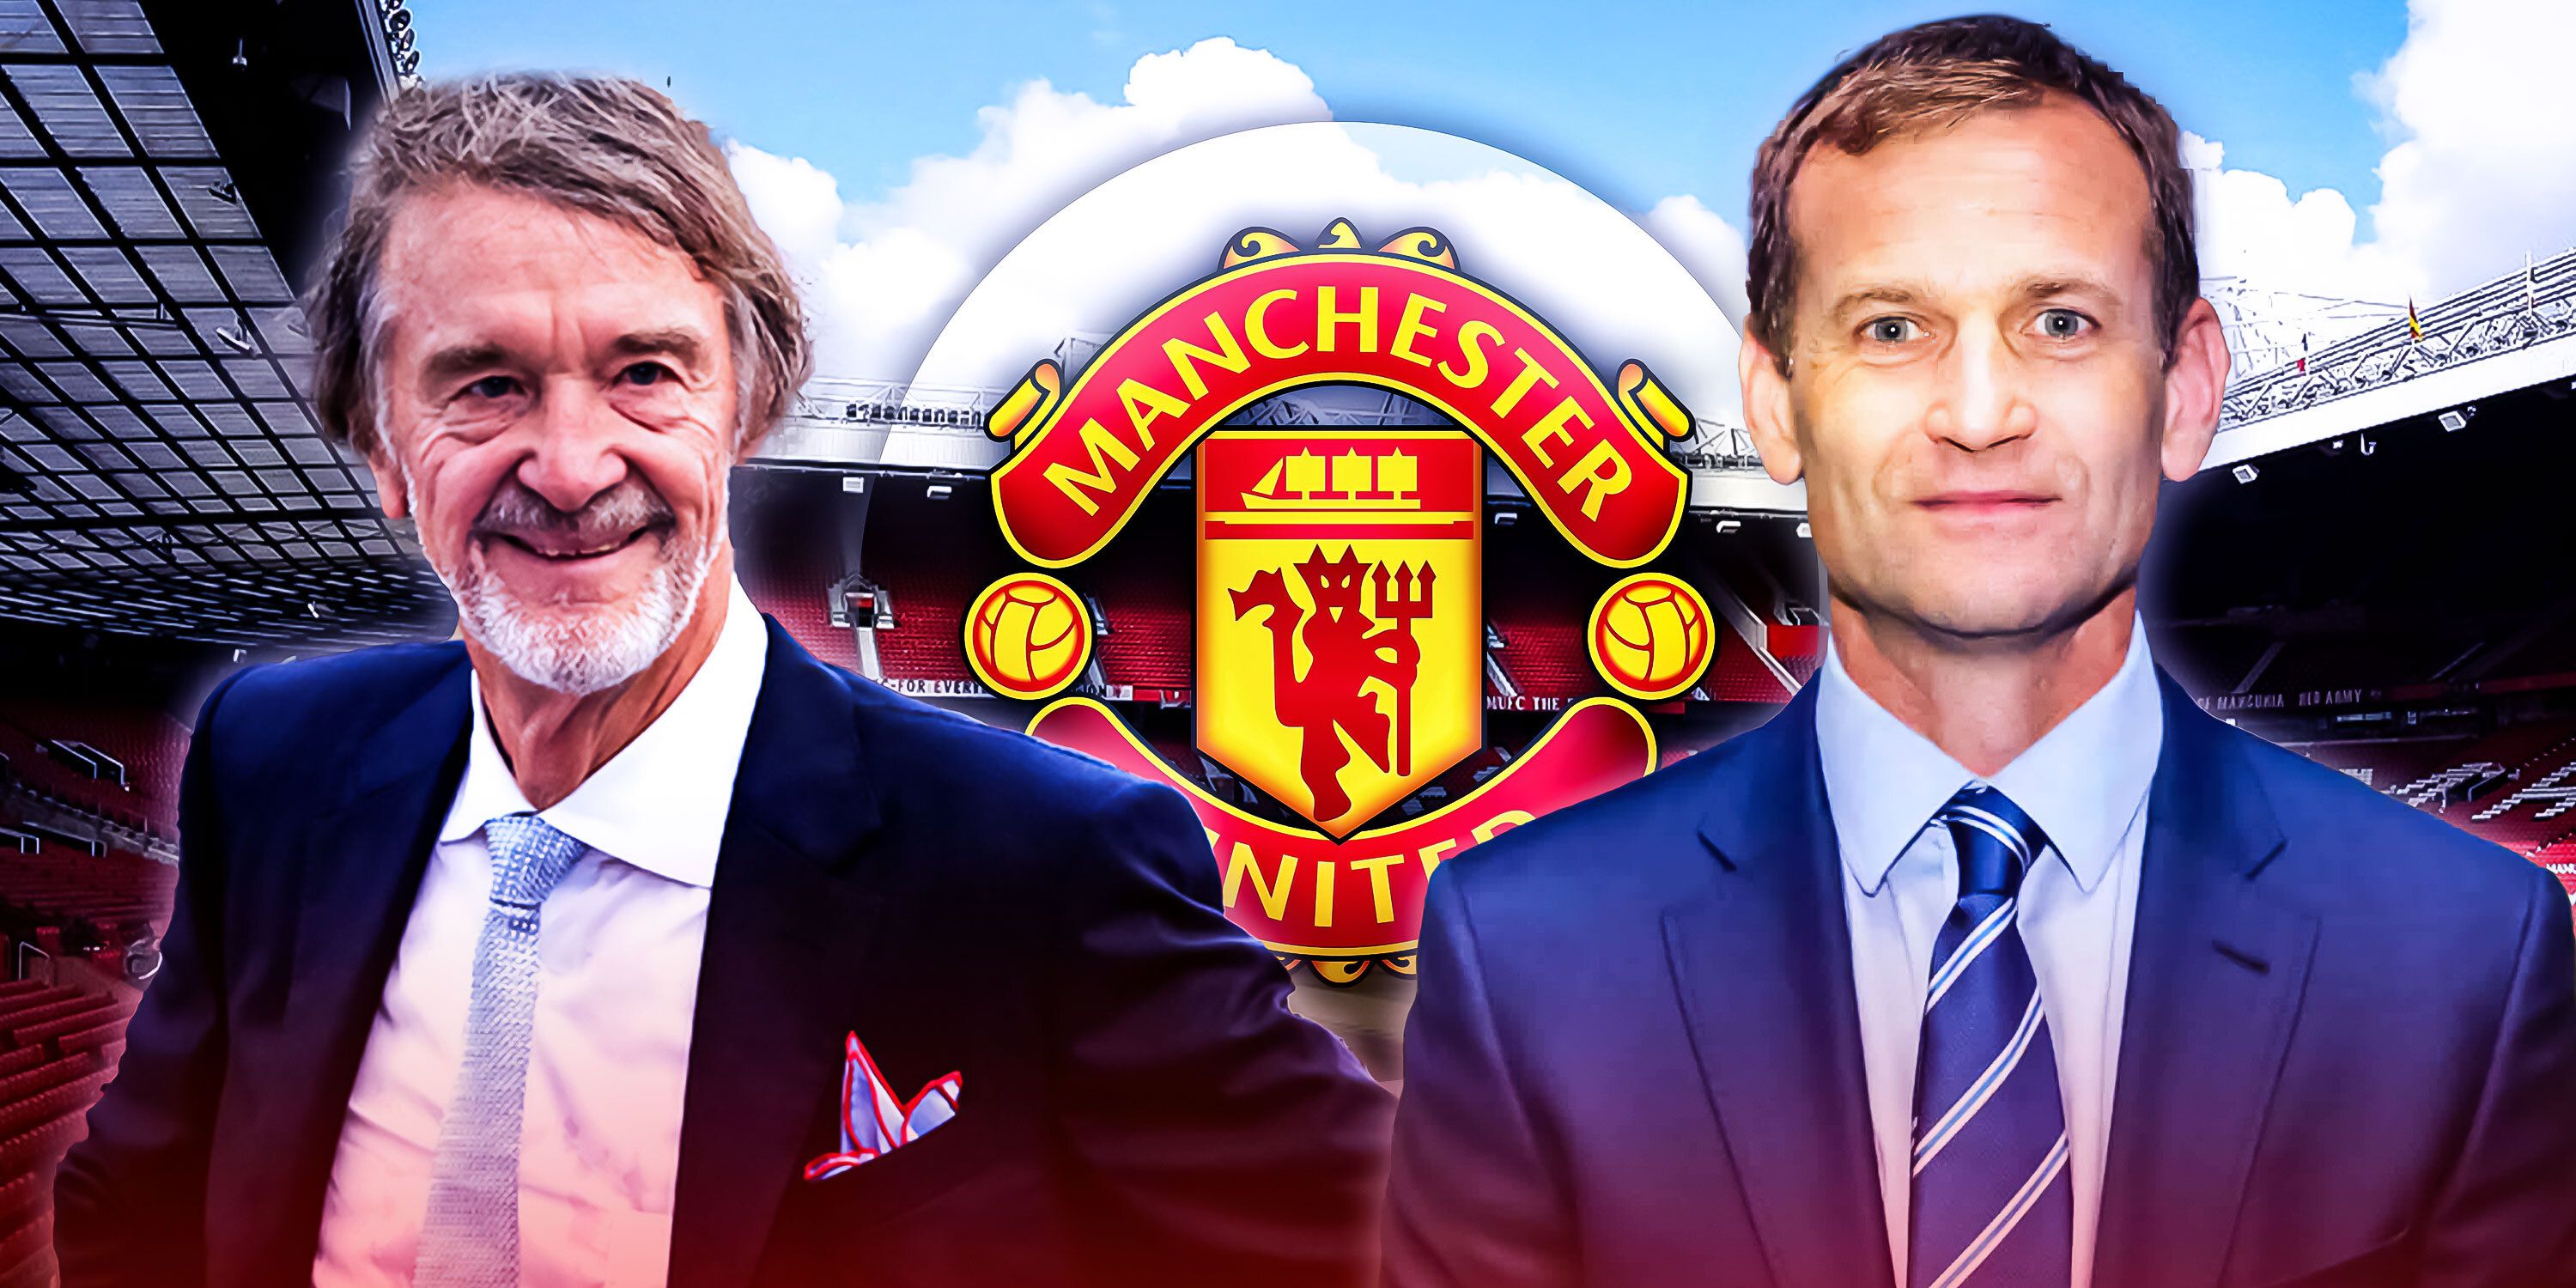 Manchester United co-owner Sir Jim Ratcliffe and Newcastle United sporting director Dan Ashworth watching on